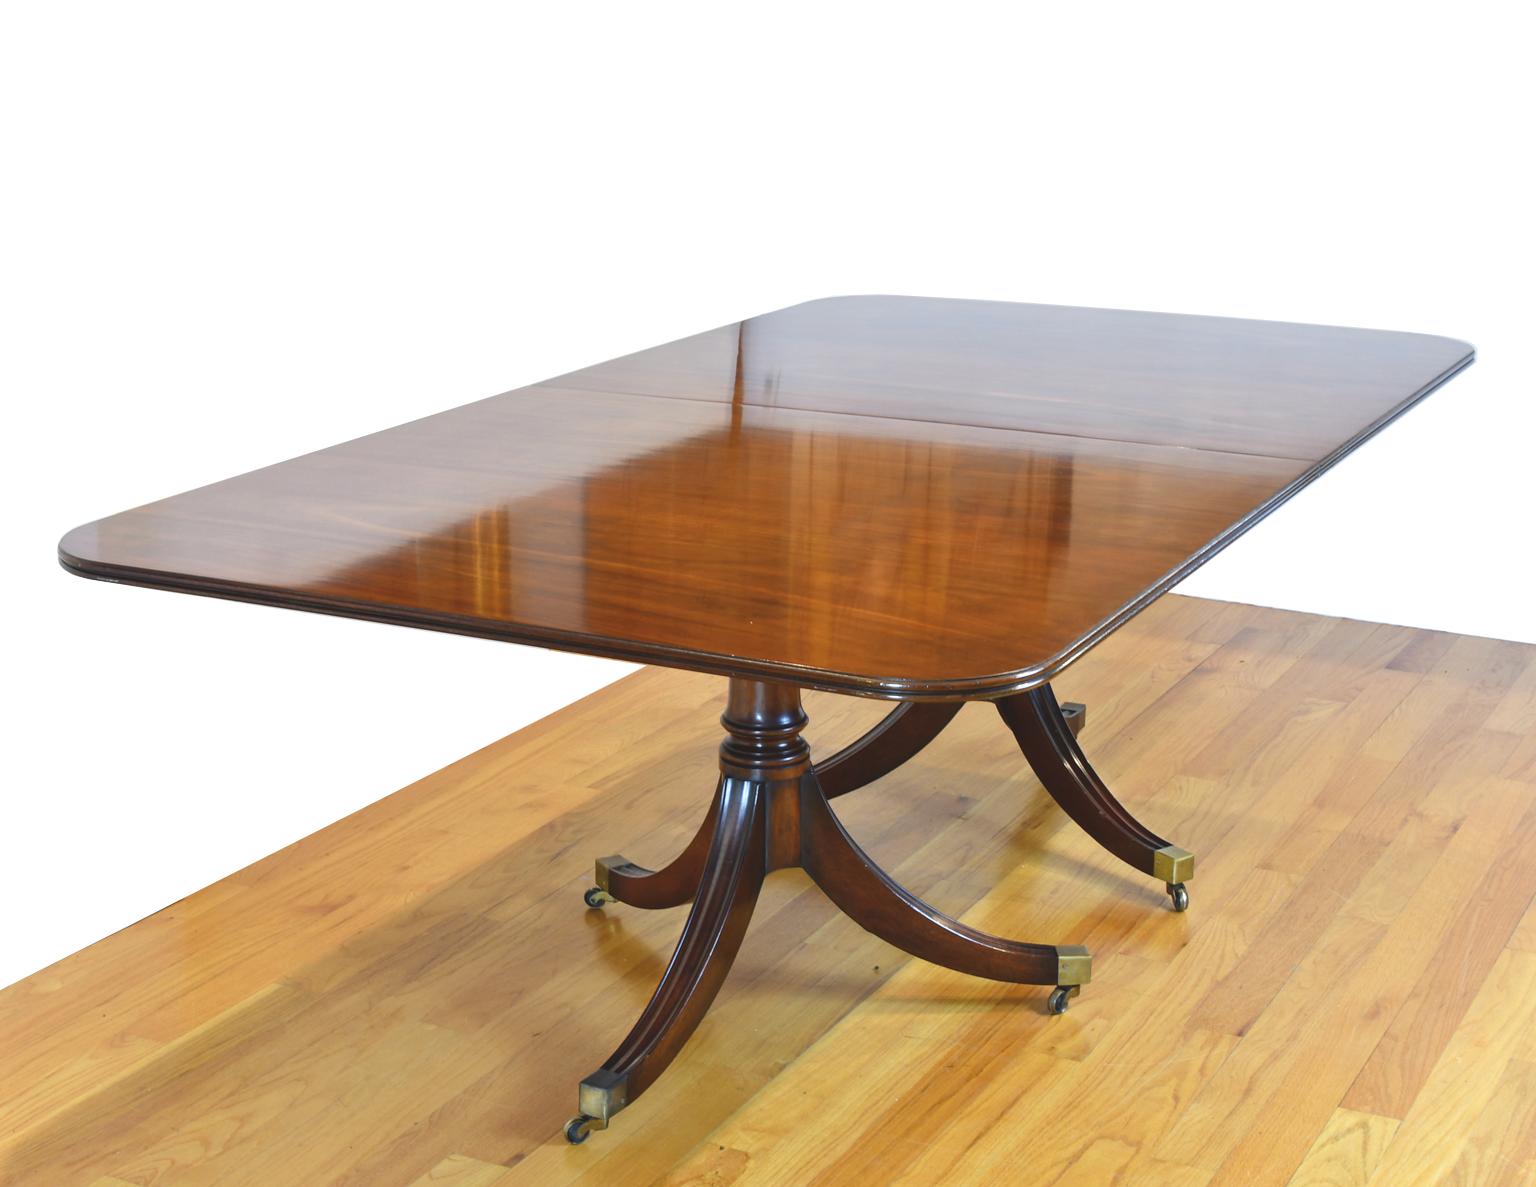 15' Antique English Banquet Dining Table in Mahogany w/ 3 Pedestals & 2 Leaves 5